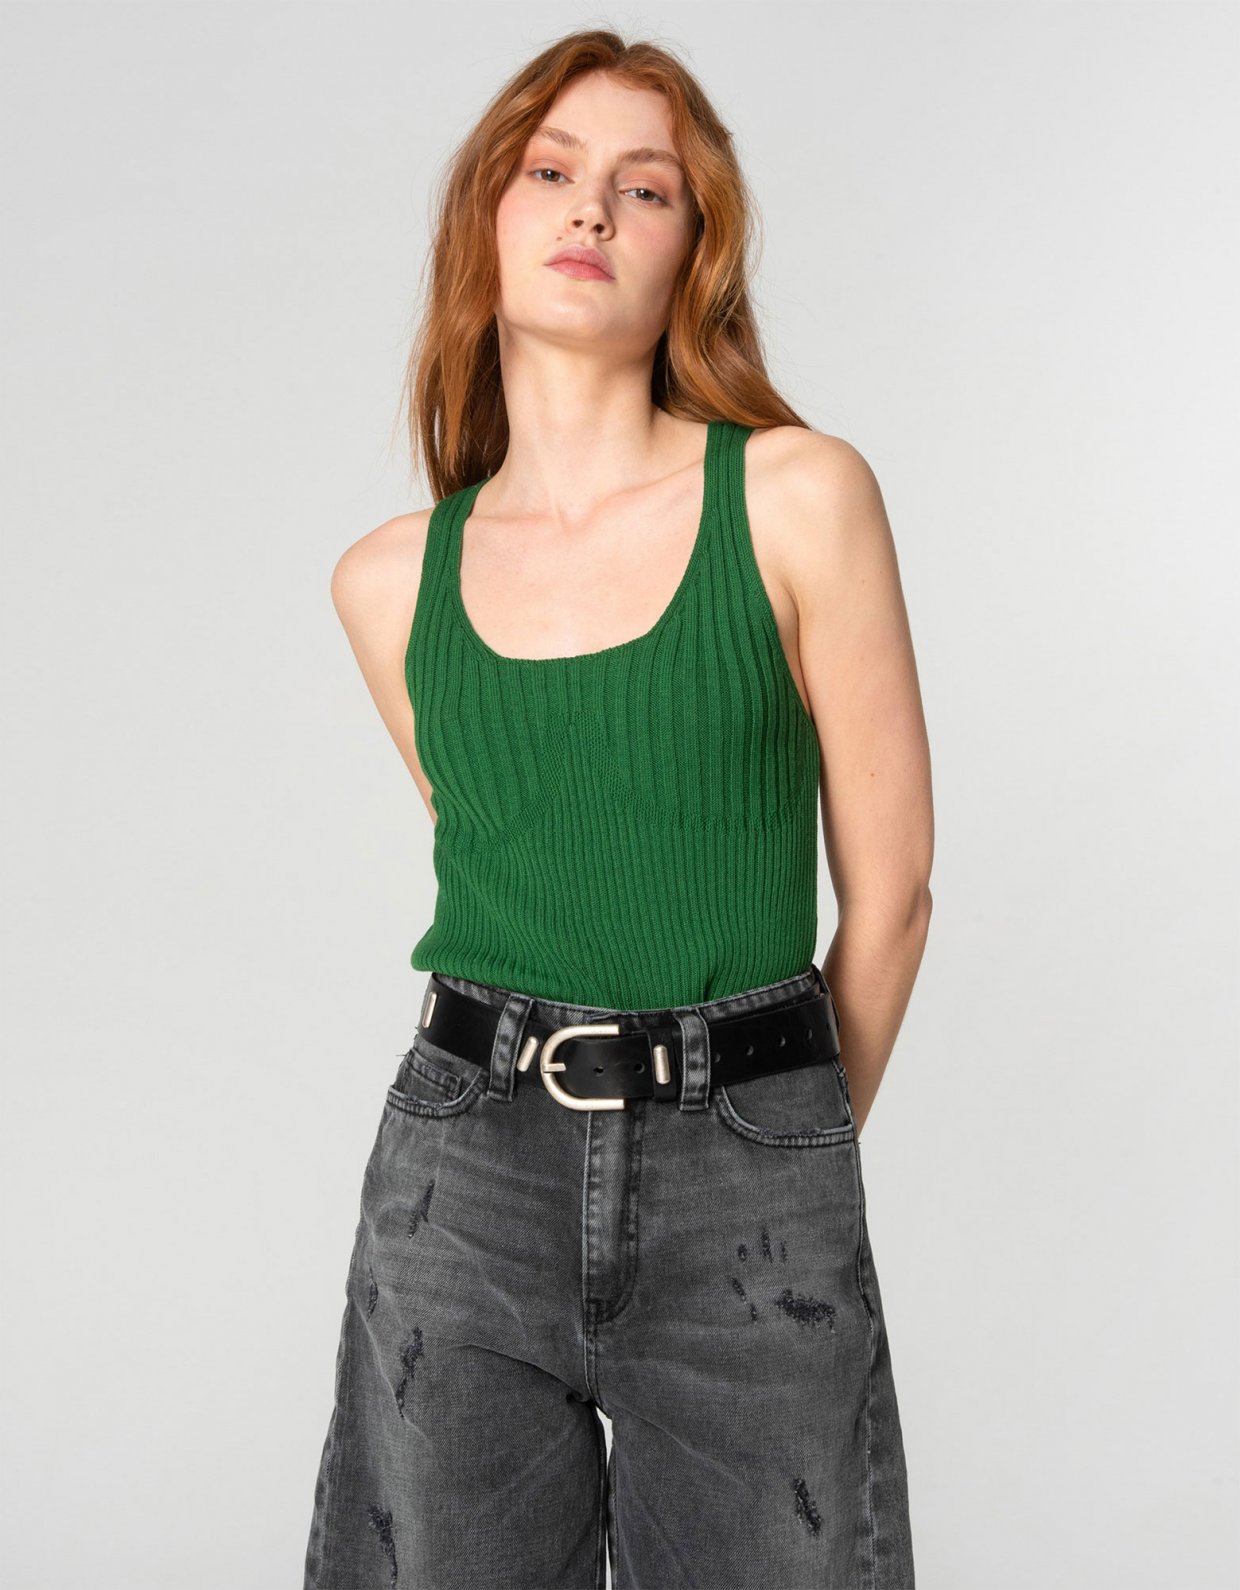 Nadia Rapti Tribes of knit top green